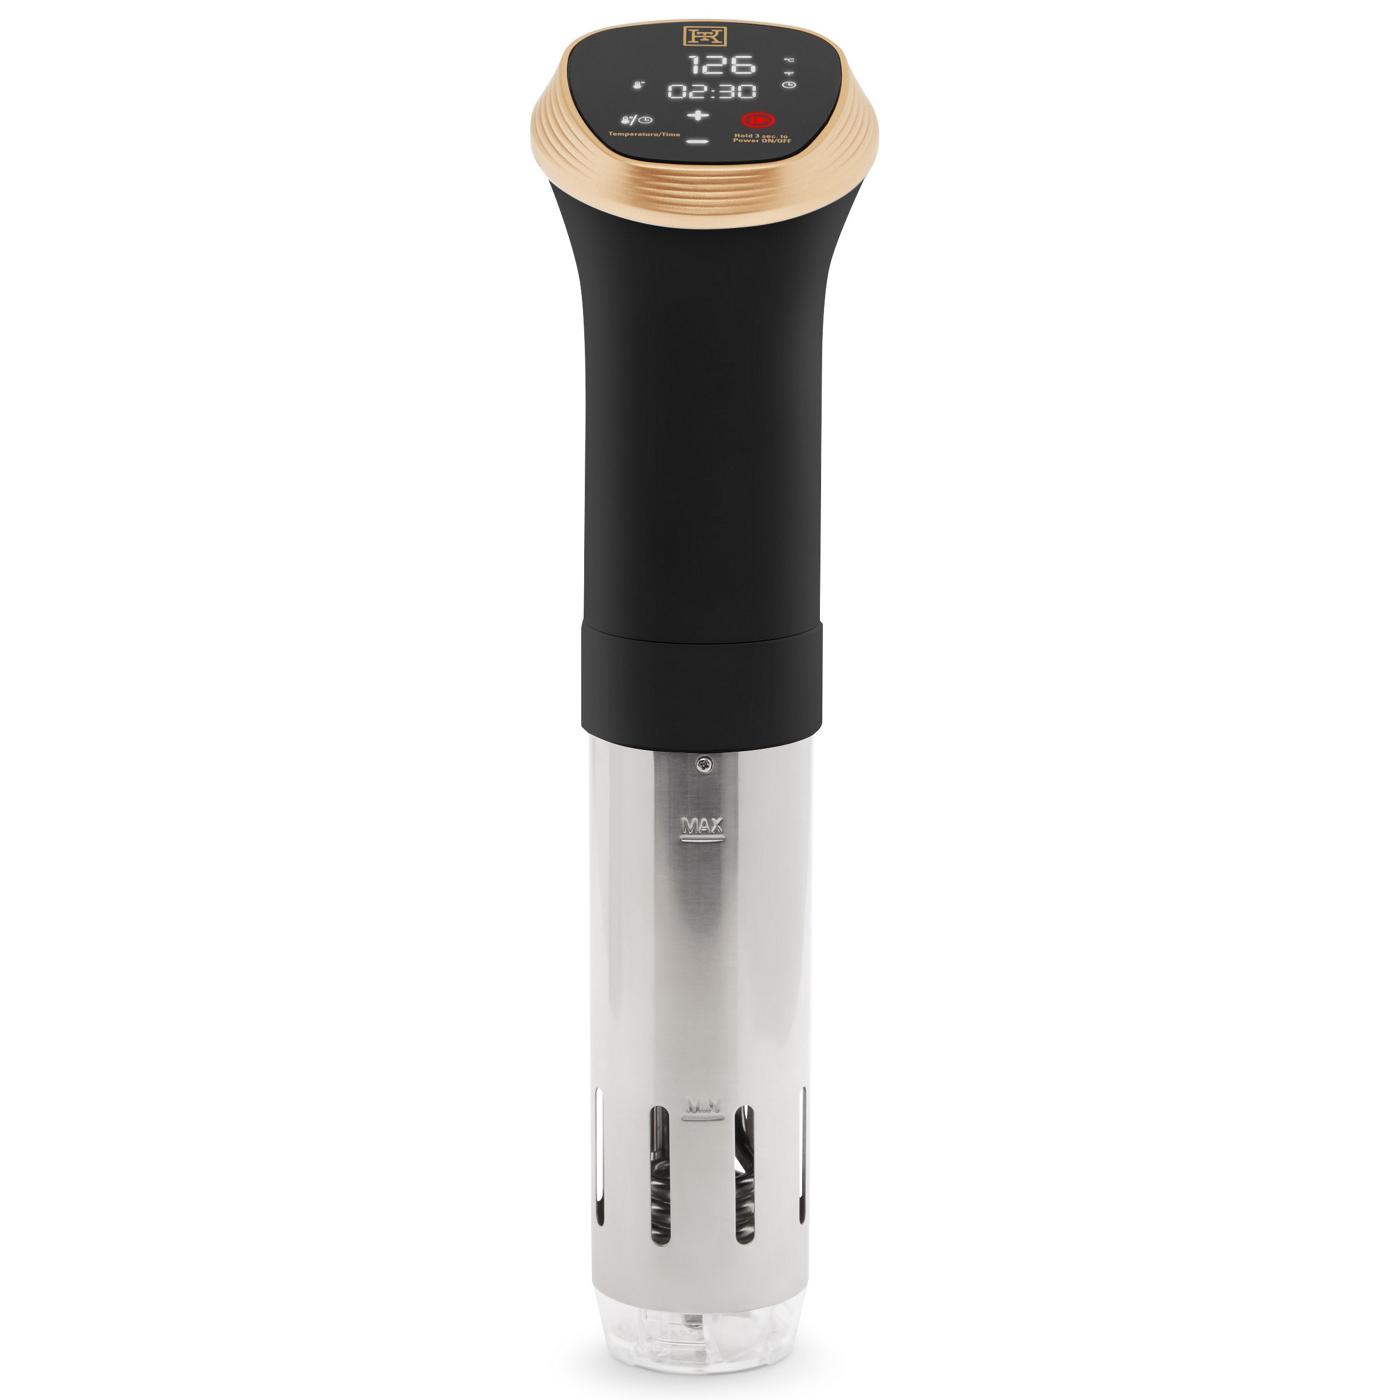 Kitchen & Table by H-E-B Sous Vide Precision Cooker - Classic Black; image 1 of 6